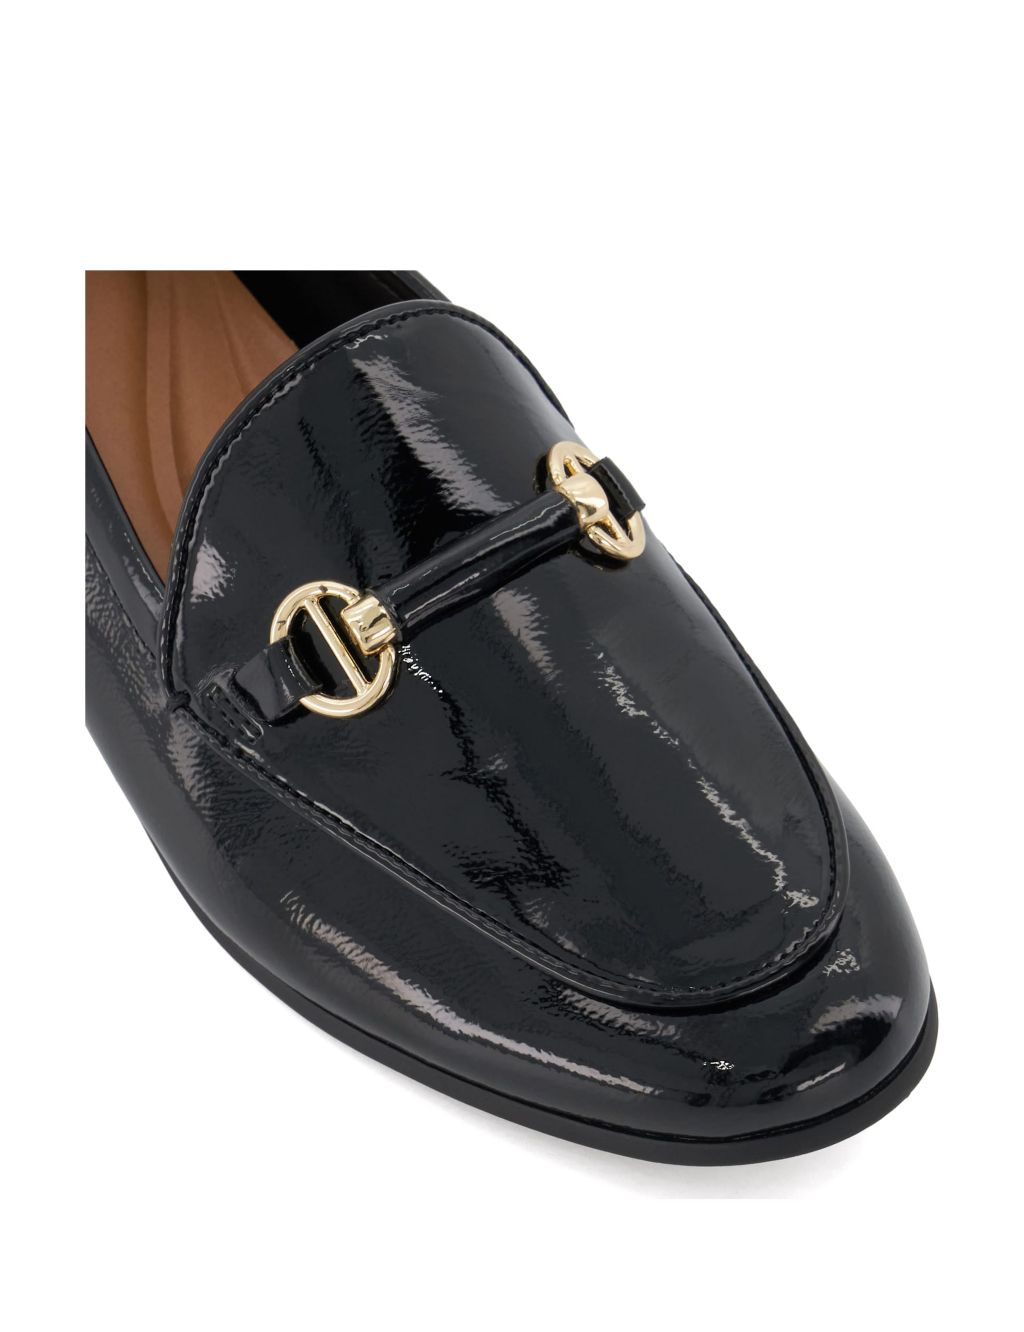 Leather Bar Trim Flat Loafers image 5